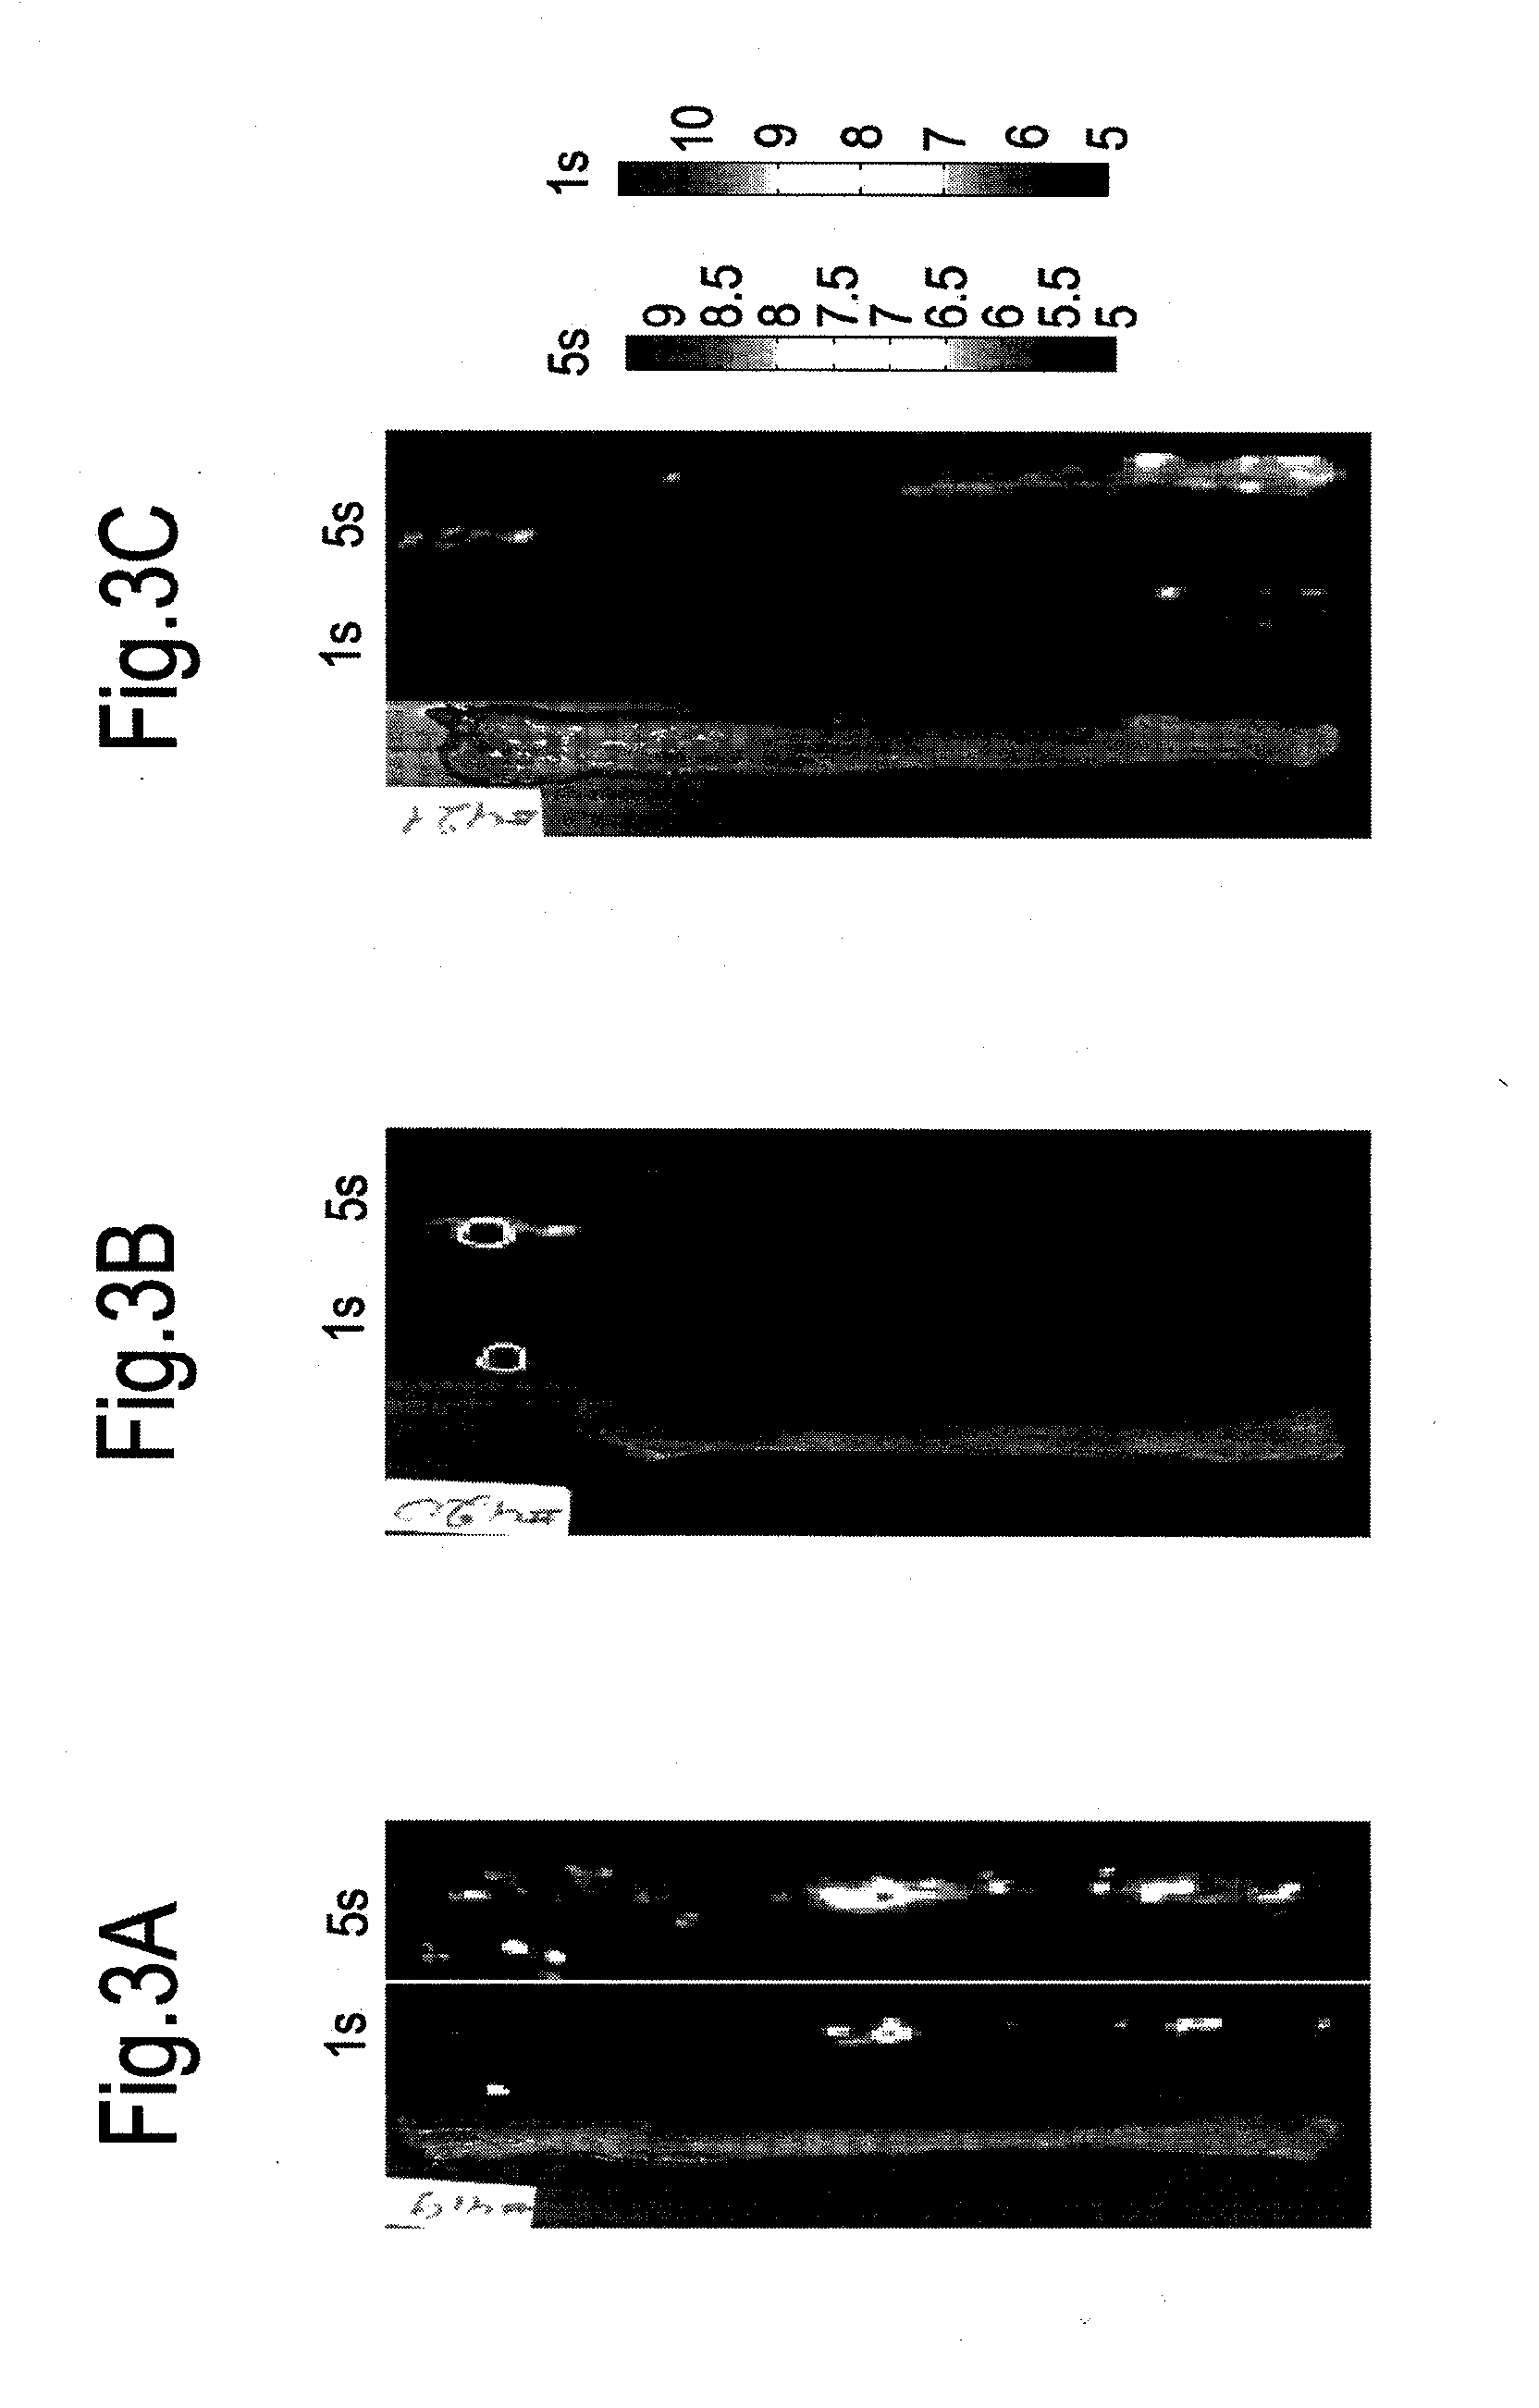 Diagnostic agents with enhanced sensitivity/specificity